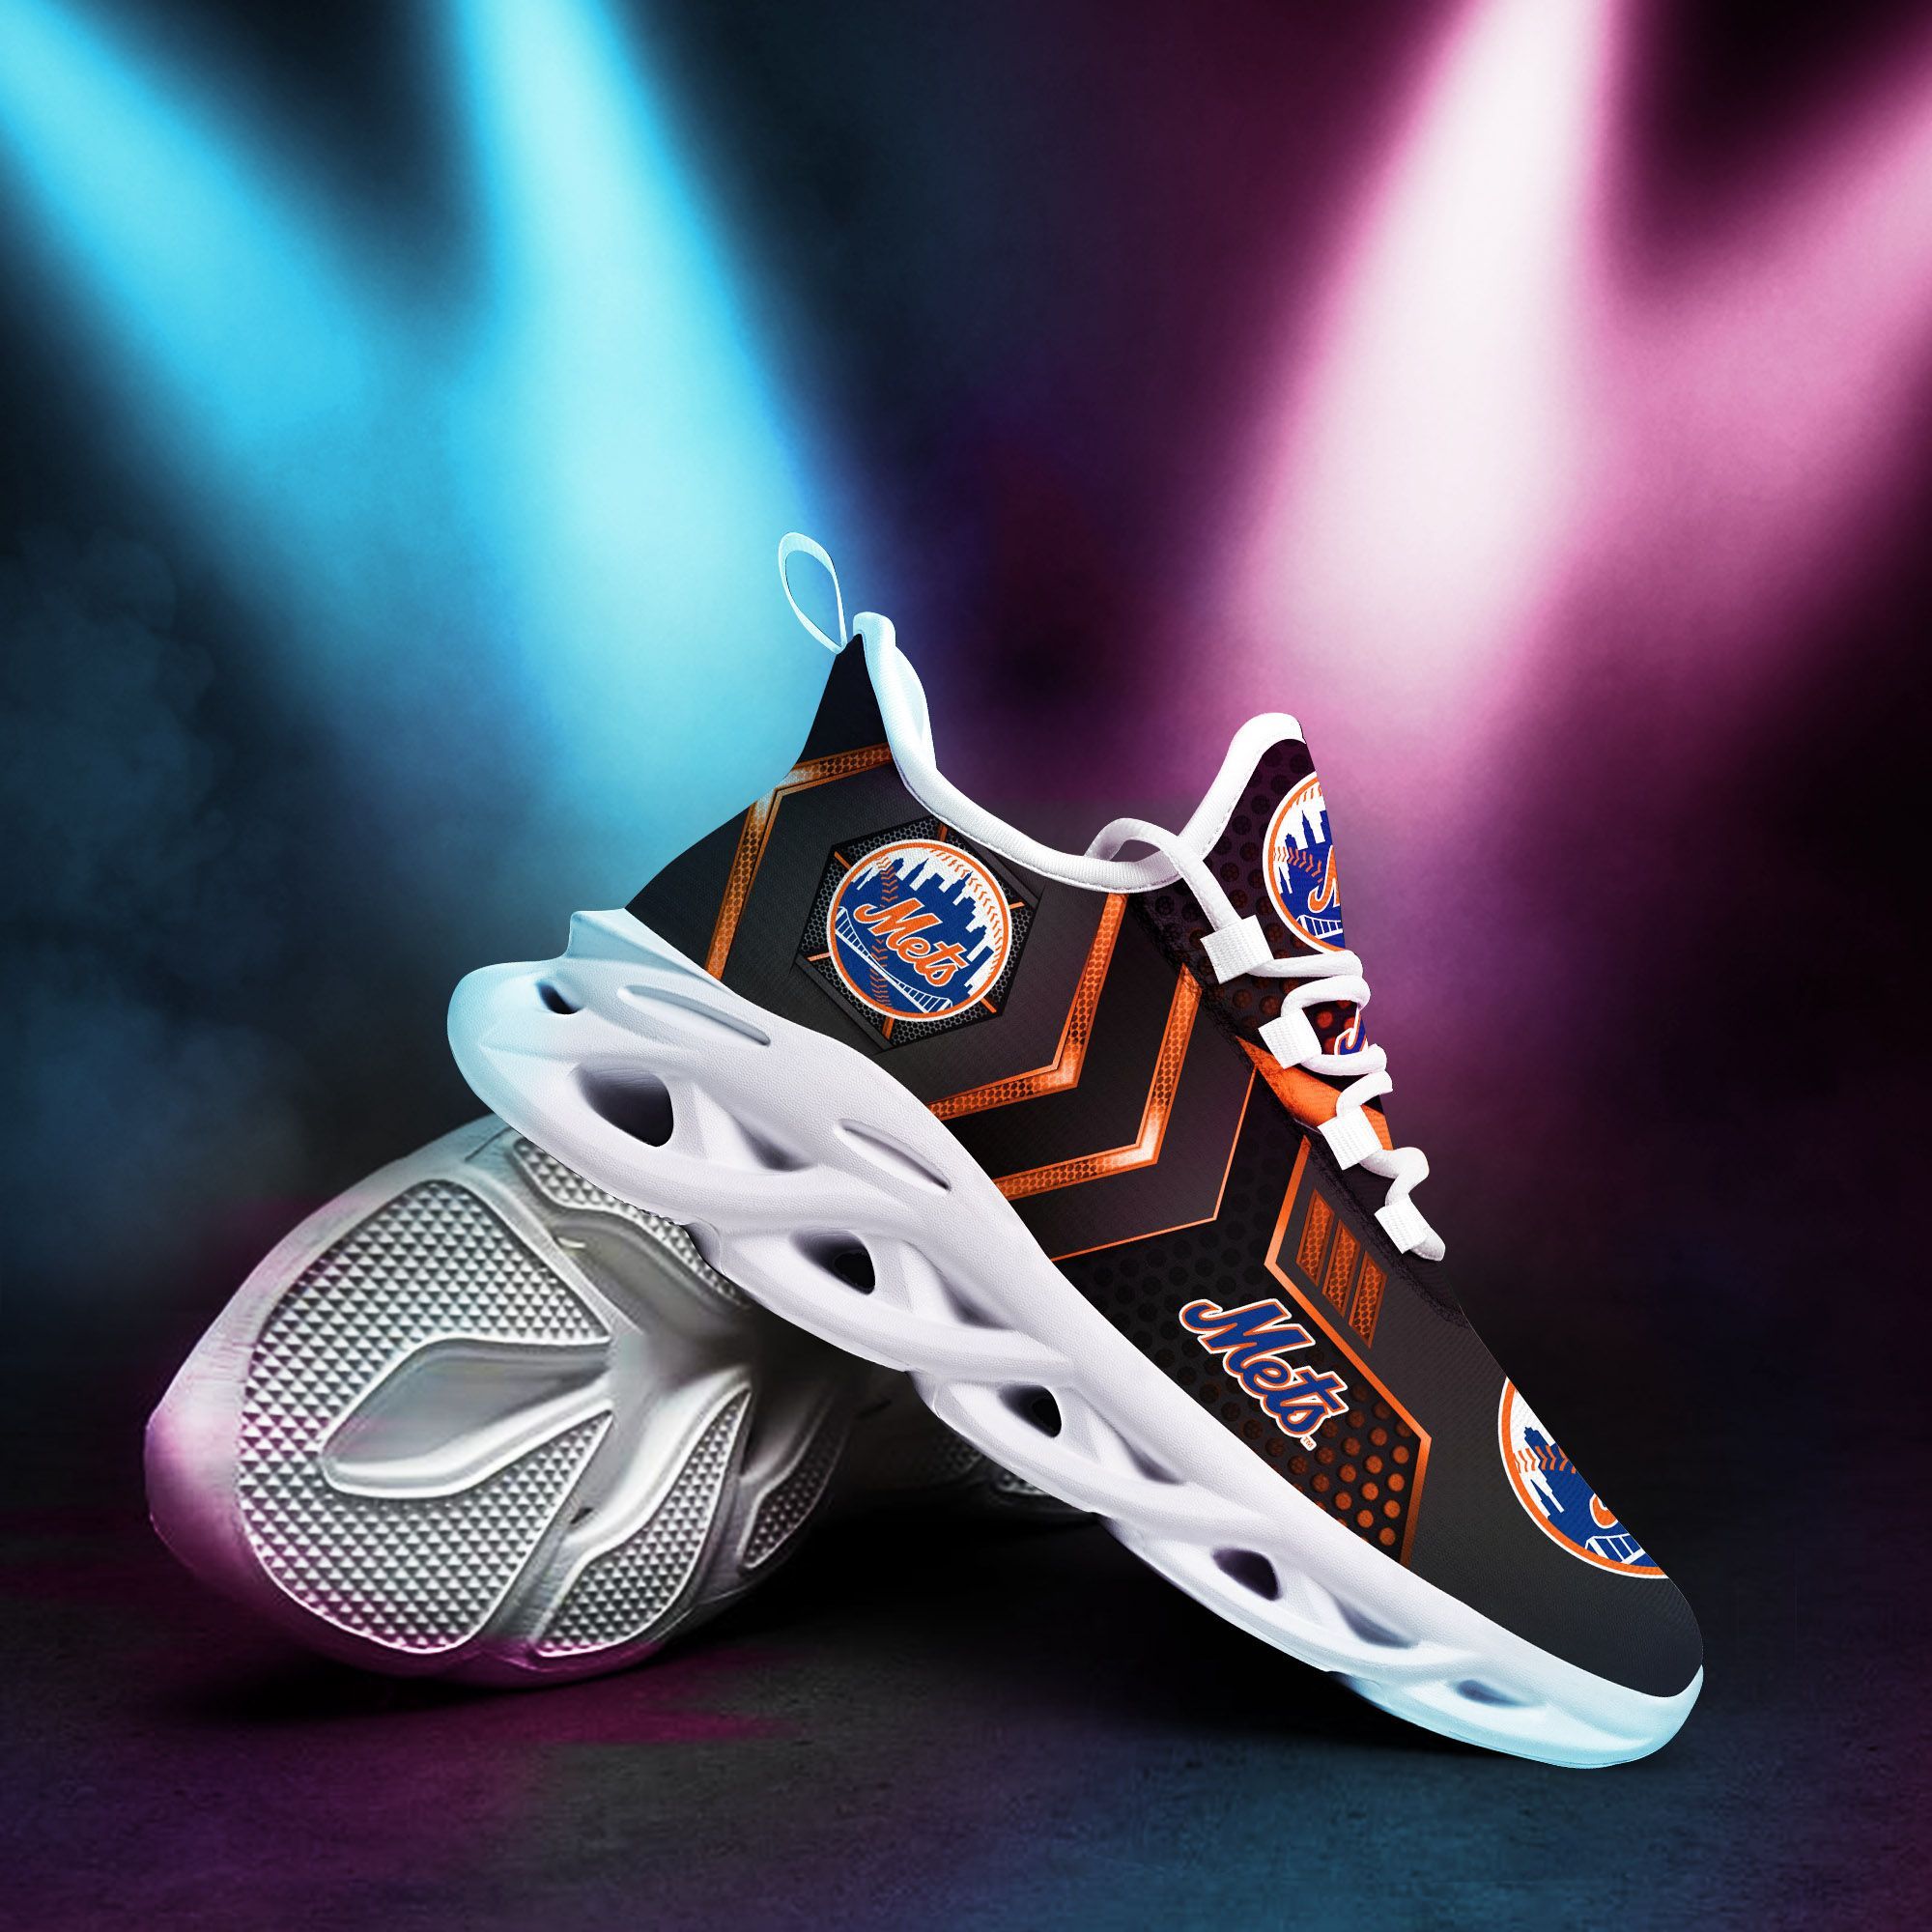 New York Mets Shoes